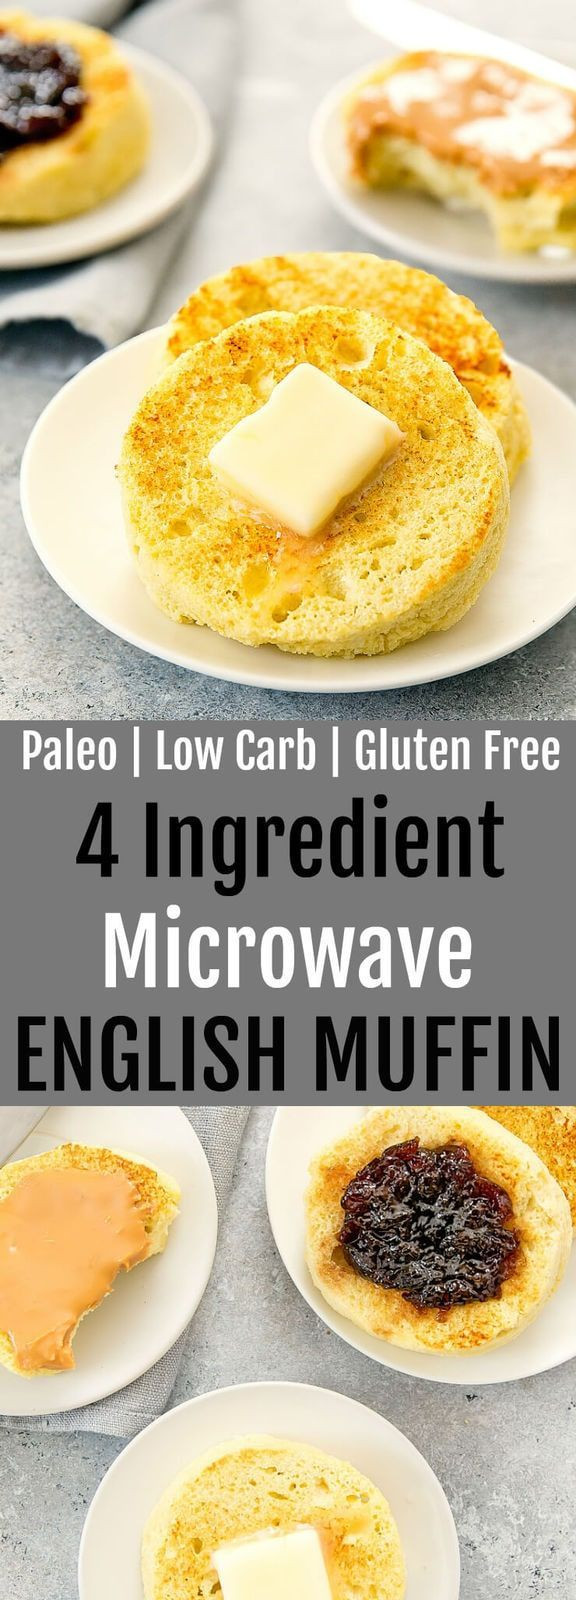 Low Carb English Muffin Recipes
 Microwave Paleo Low Carb English Muffin Recipe